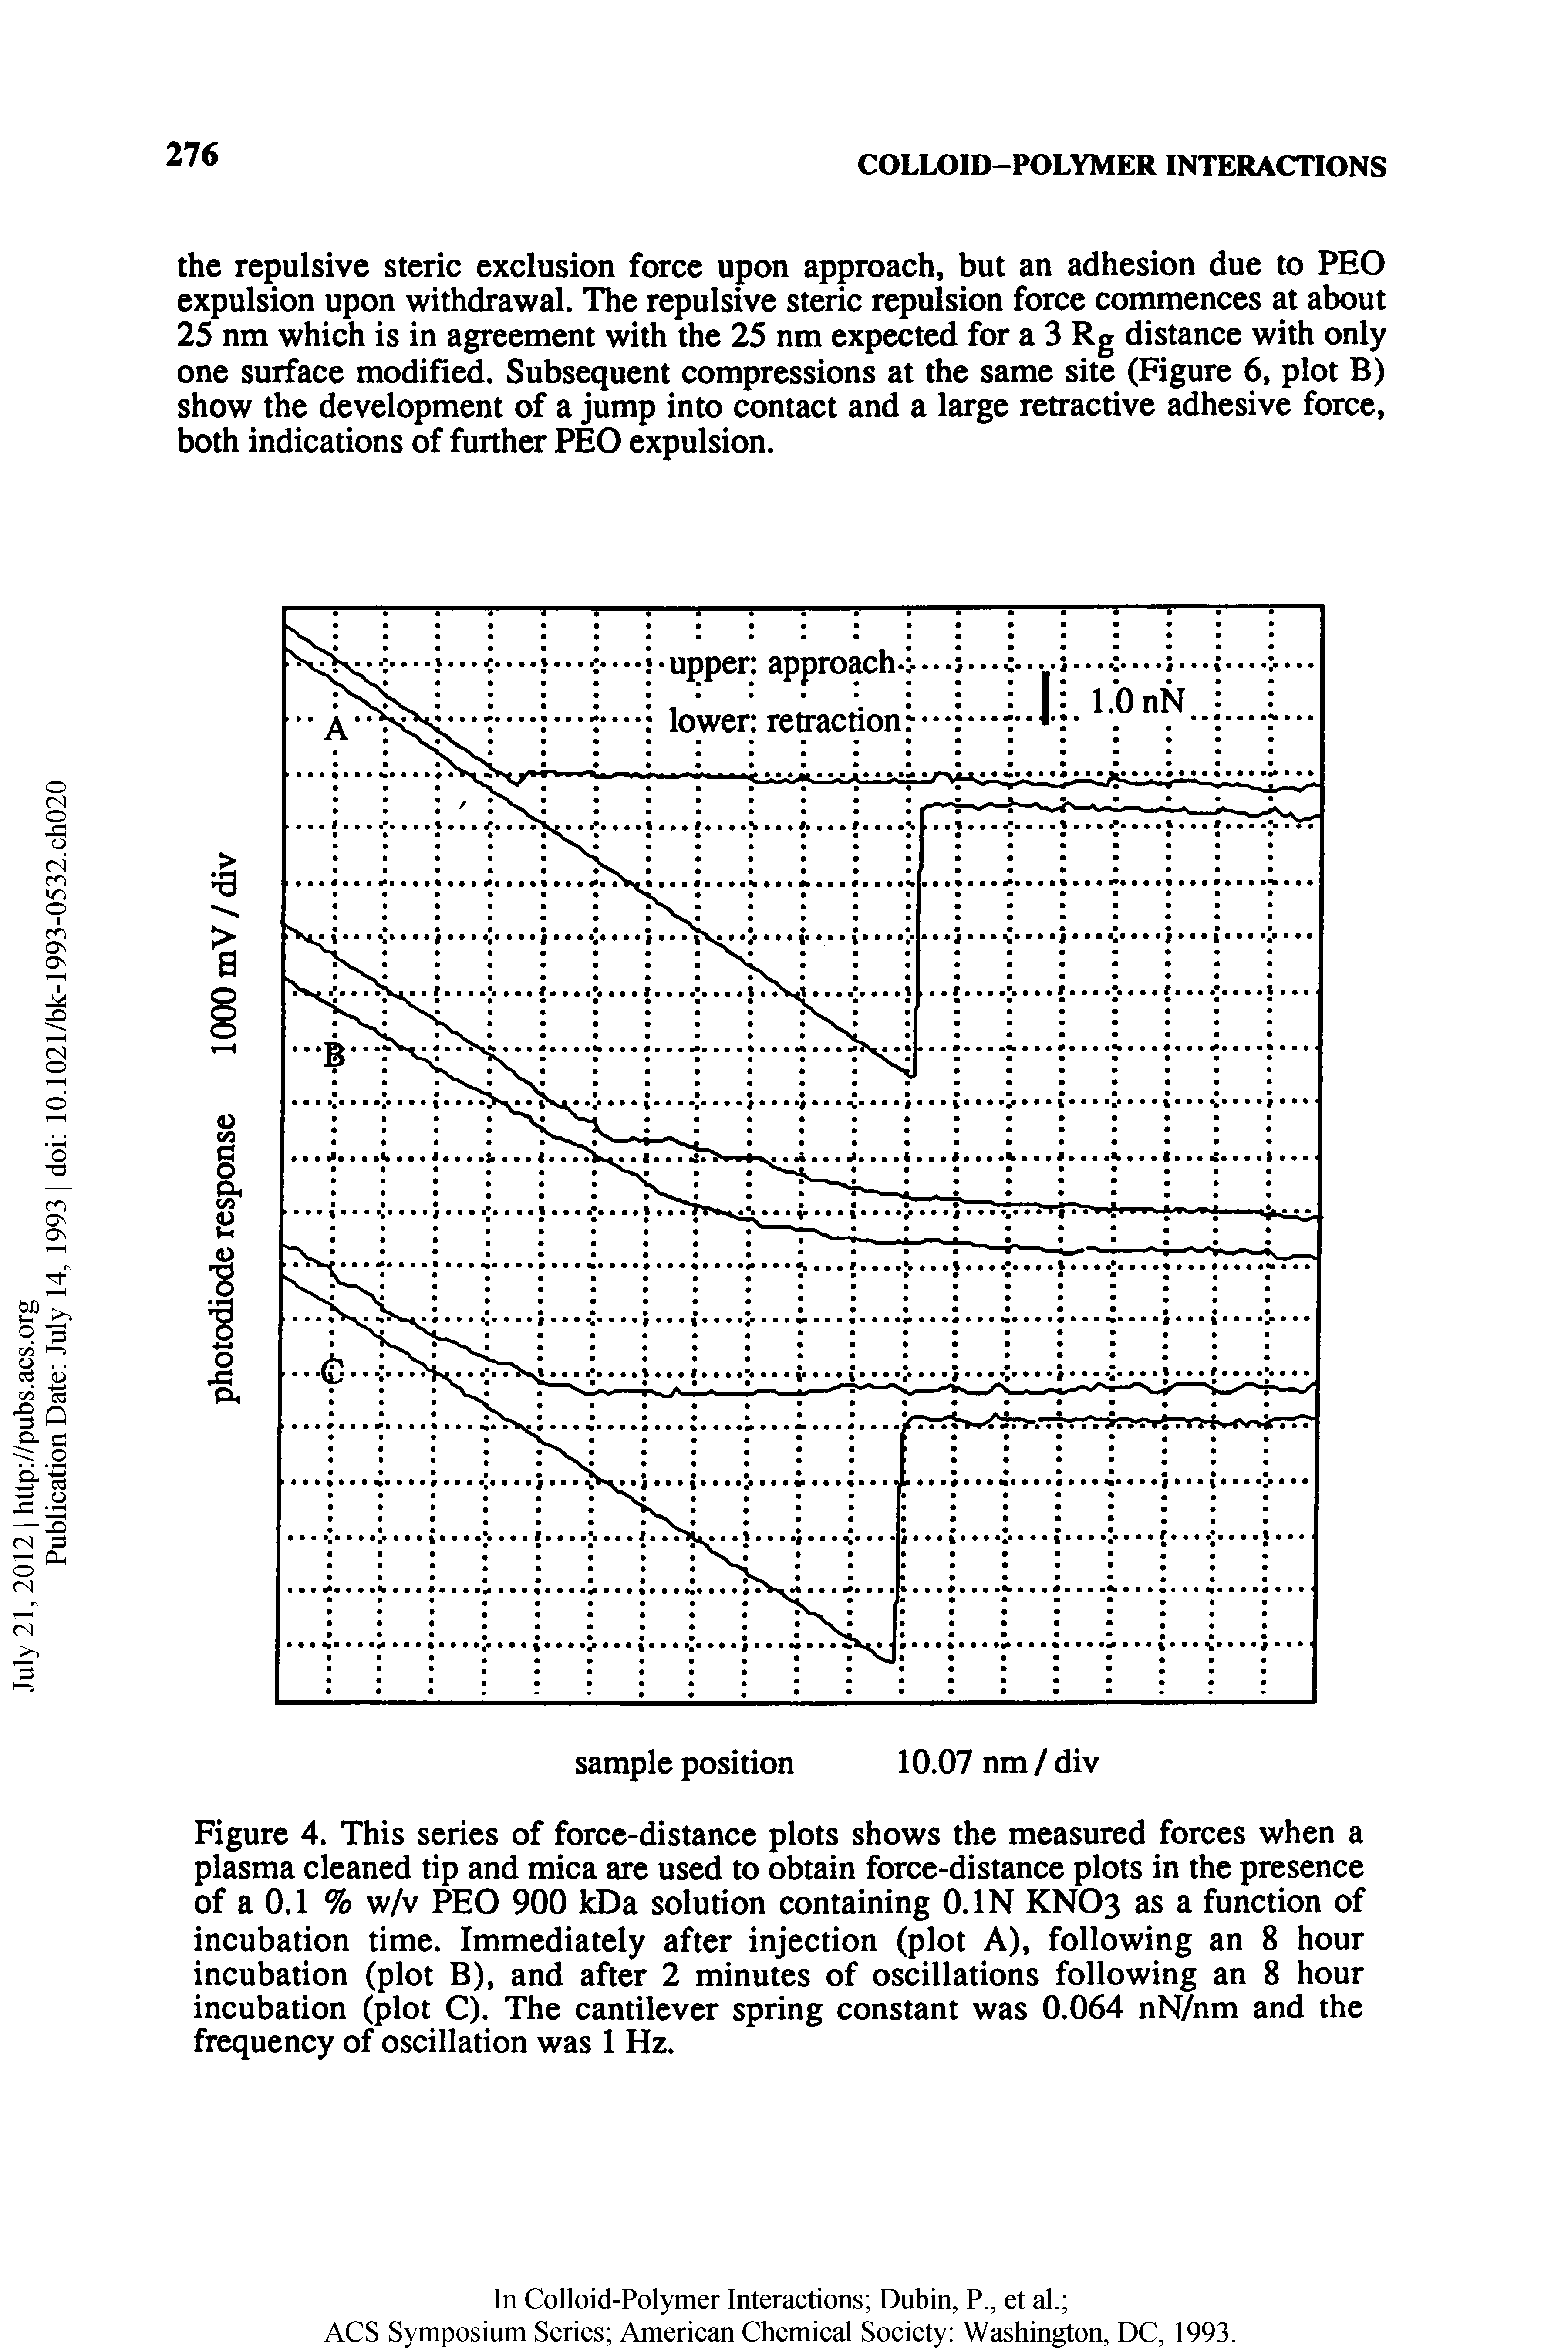 Figure 4. This series of force-distance plots shows the measured forces when a plasma cleaned tip and mica are used to obtain force-distance plots in the presence of a 0.1 % w/v PEO 900 kDa solution containing O.IN KNO3 as a function of incubation time. Immediately after injection (plot A), following an 8 hour incubation (plot B), and after 2 minutes of oscillations following an 8 hour incubation (plot C). The cantilever spring constant was 0.064 nN/nm and the frequency of oscillation was 1 Hz.